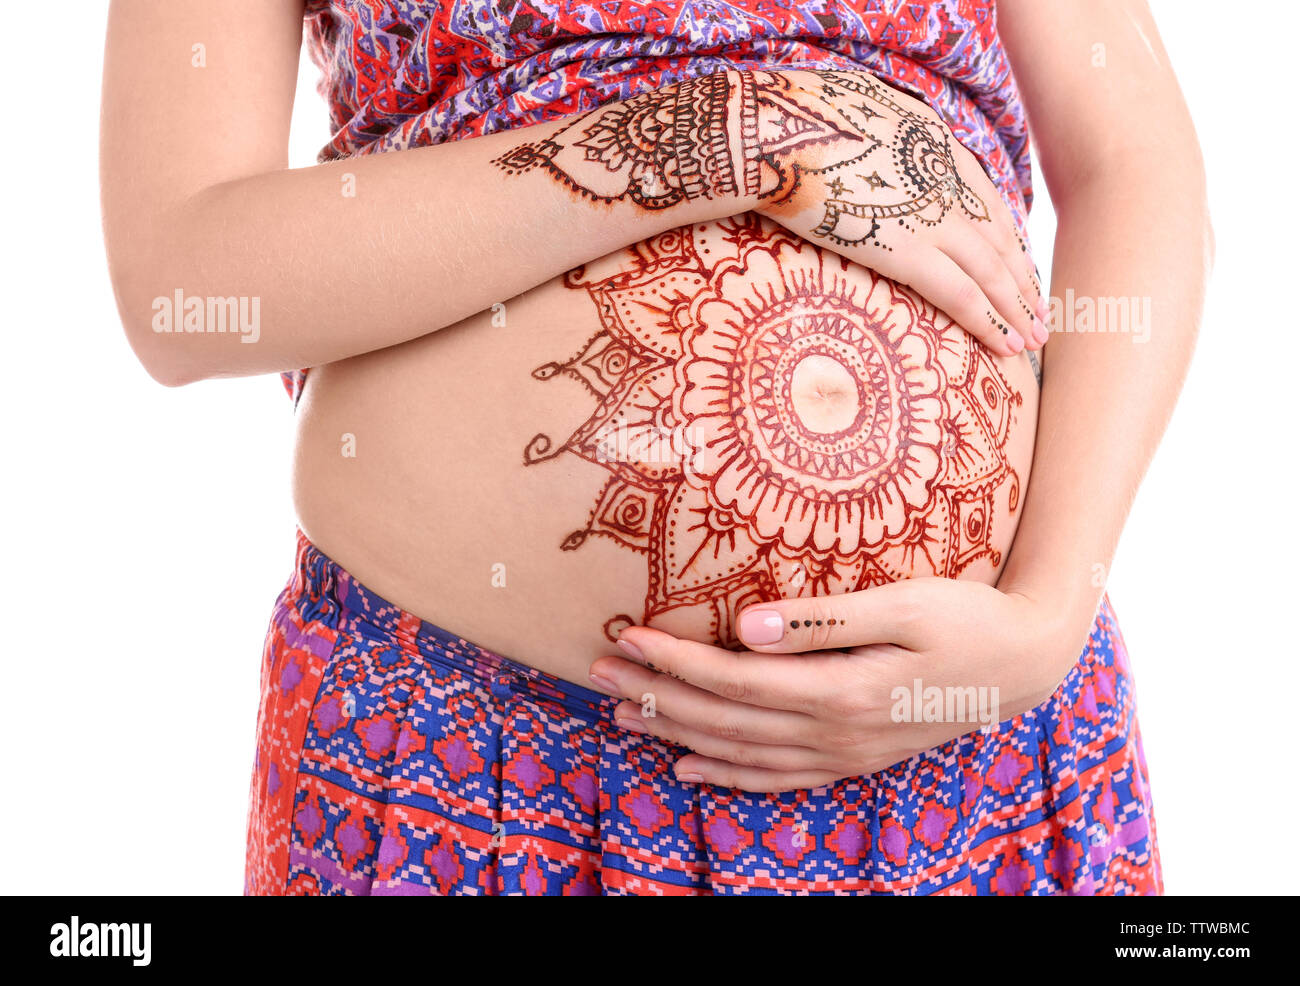 Henna Tattoo on a Womans Pregnant Belly and Hands 994054 Stock Photo at  Vecteezy